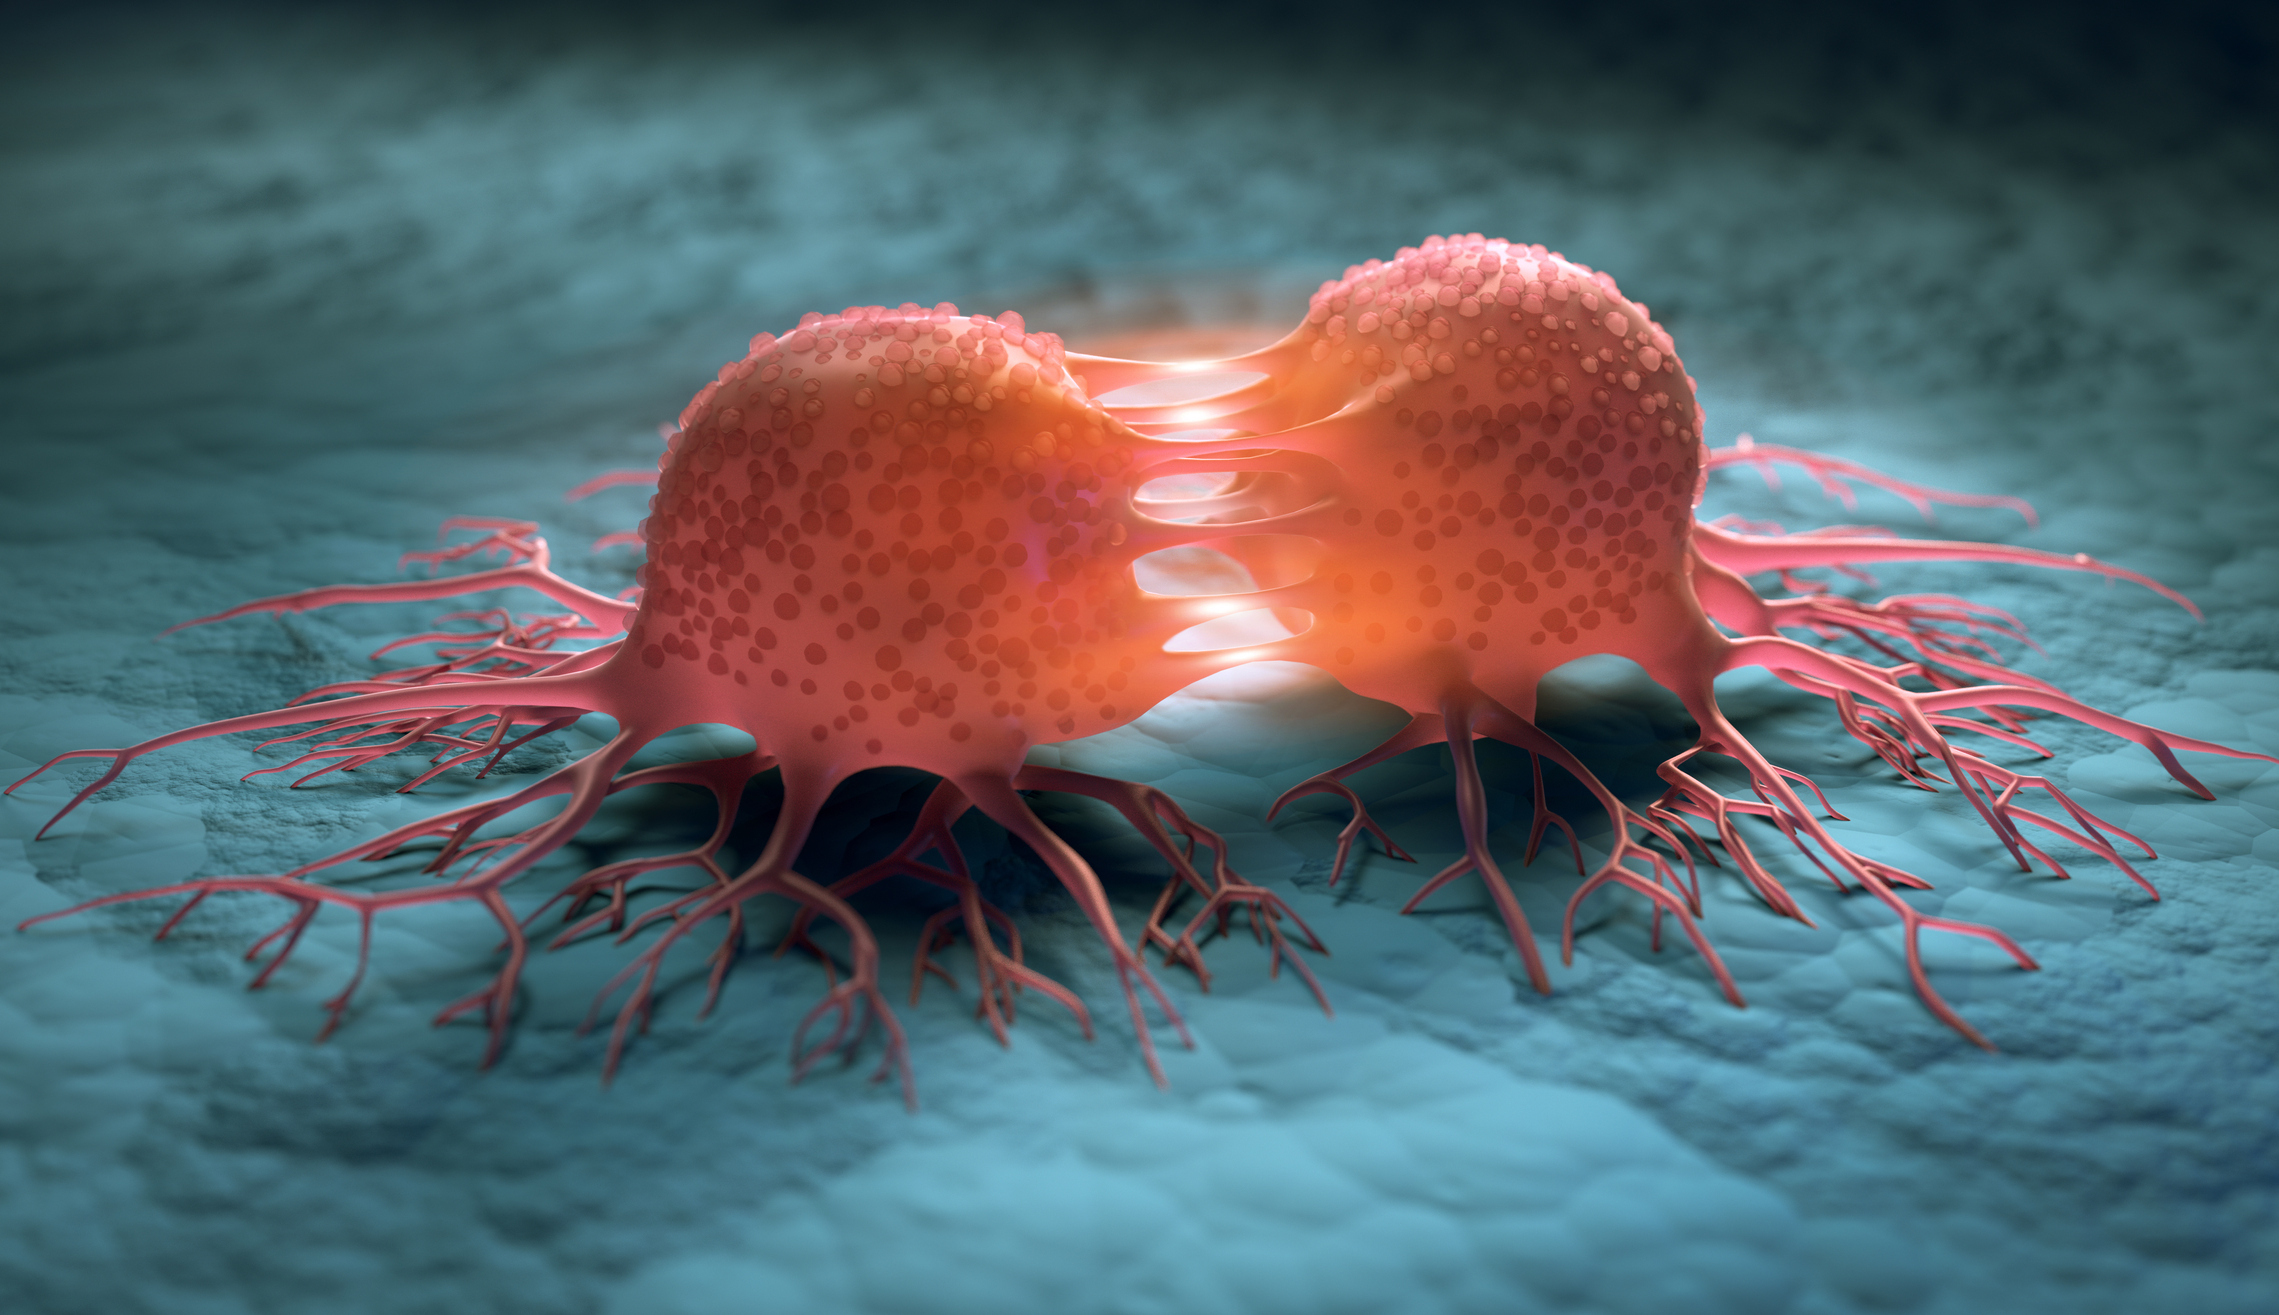 Ovarian and prostate cancer developments give ‘hope for the future’